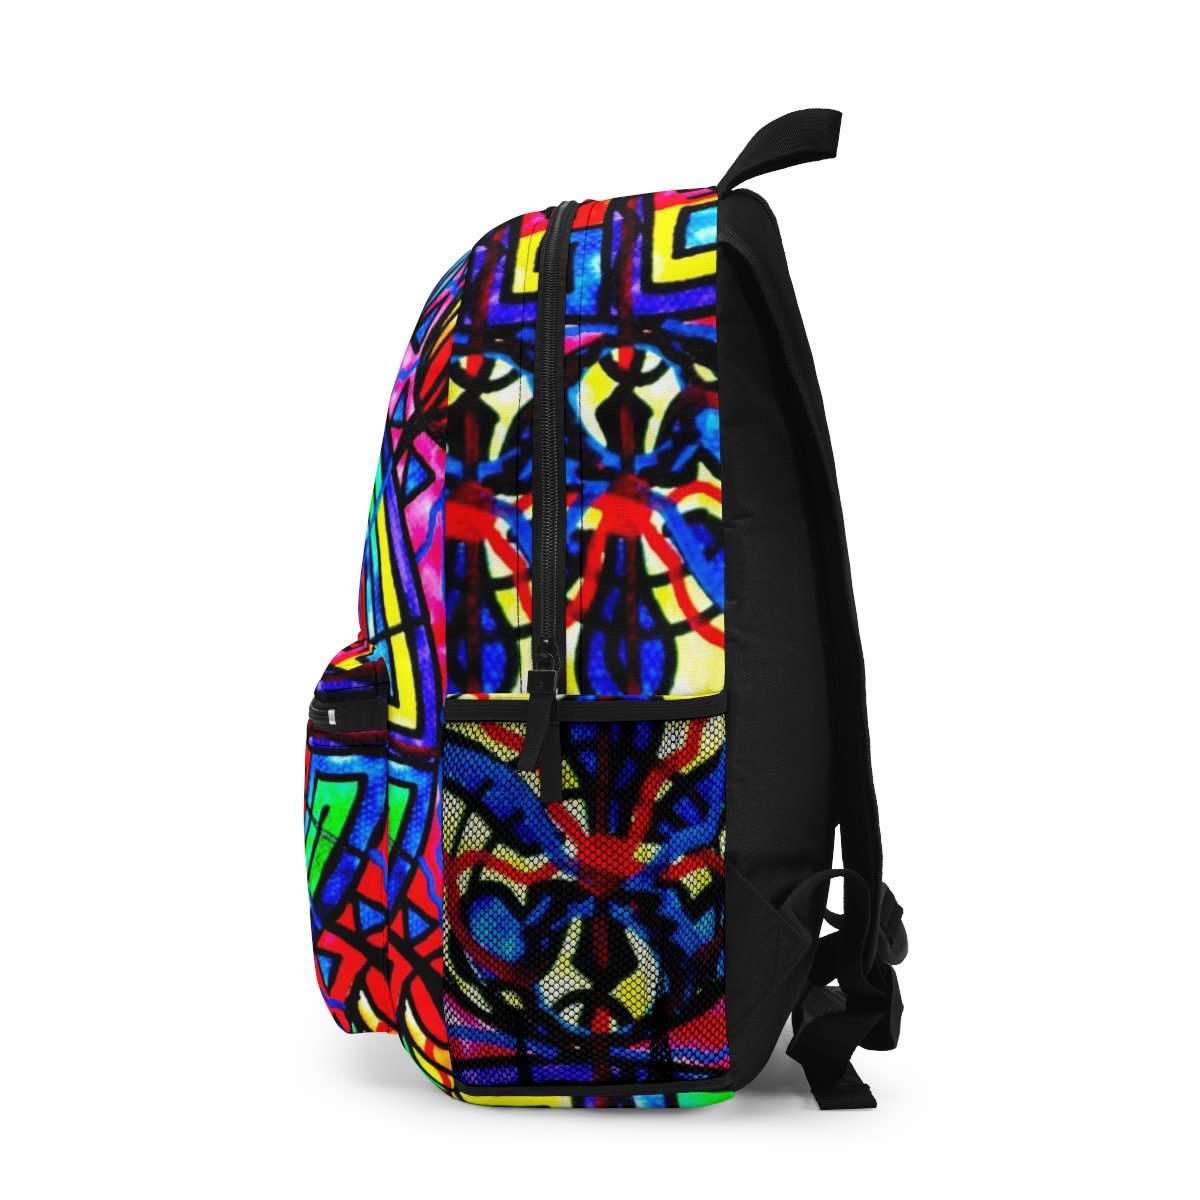 get-your-sporting-goods-of-labyrinth-aop-backpack-online-sale_2.jpg